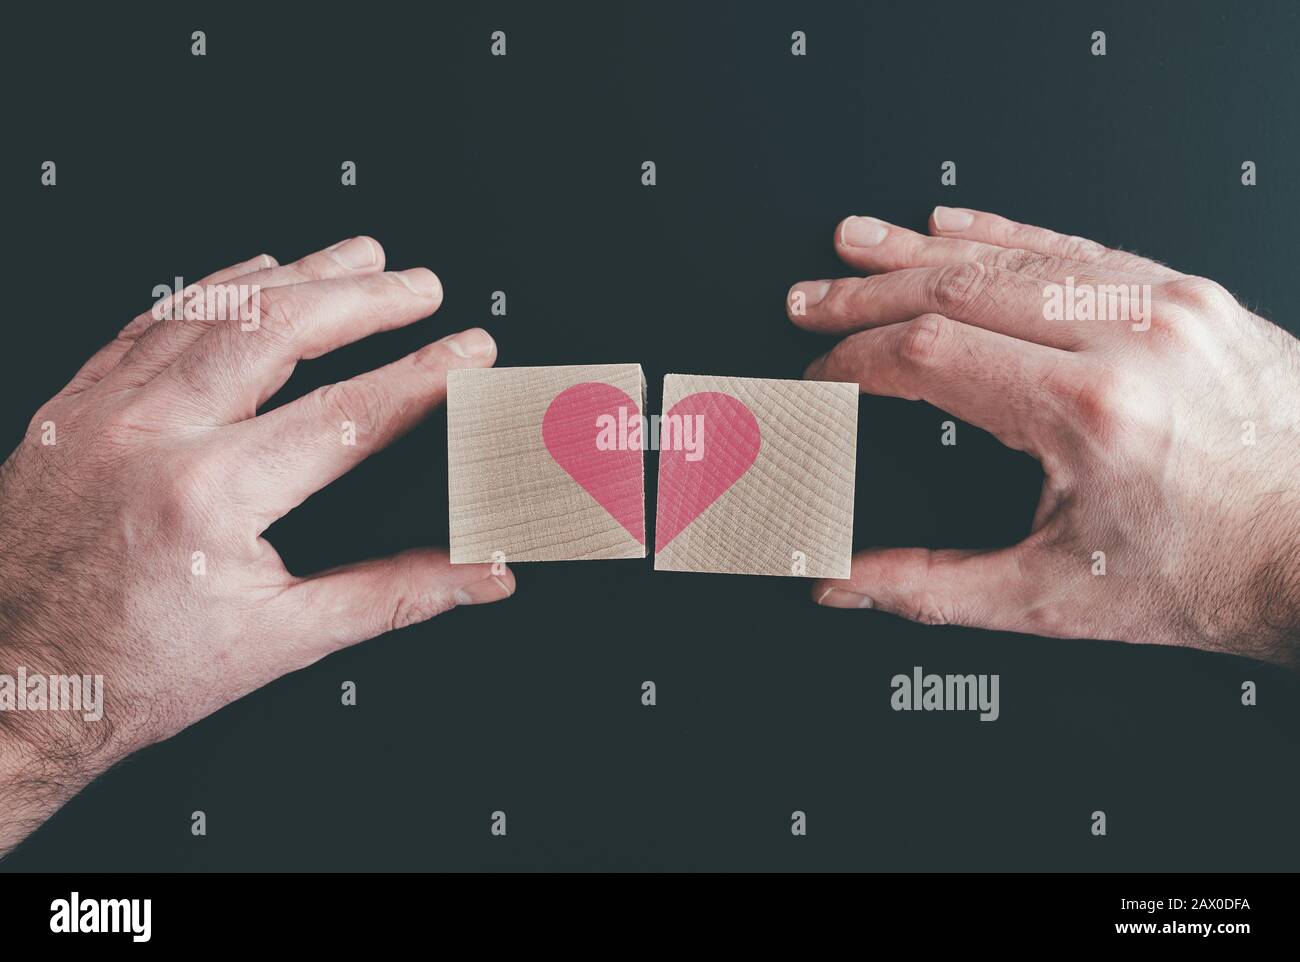 hands connecting or disconnecting woodenblocks with red heart, love or broken heart concept Stock Photo